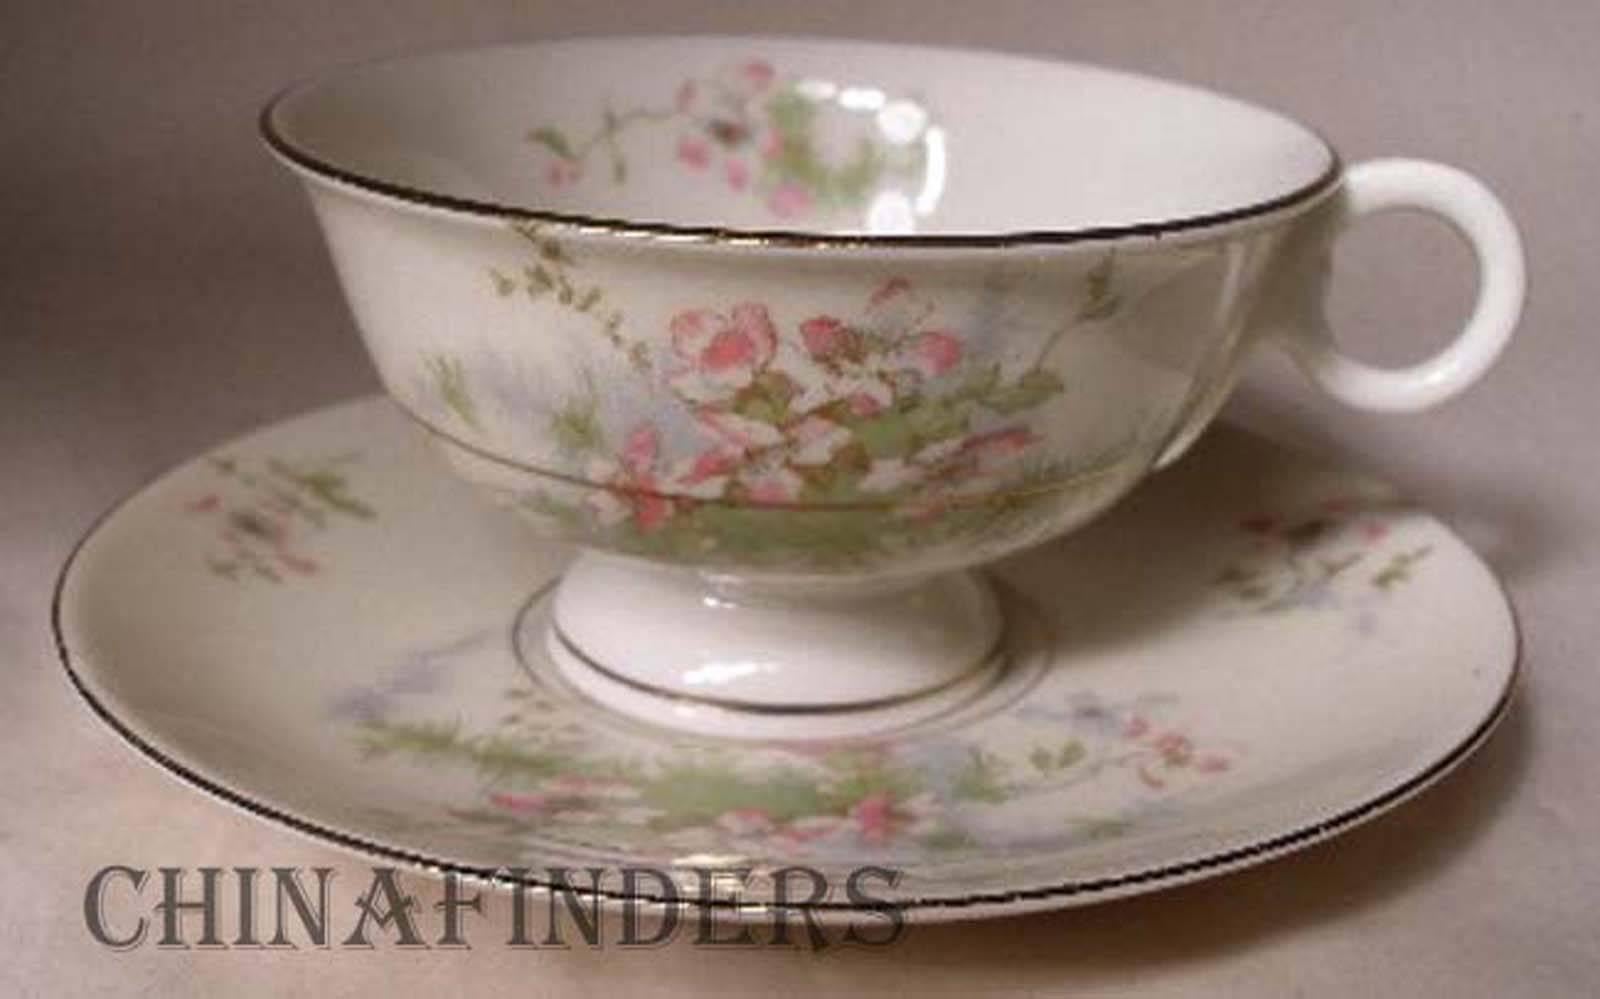 CHINA FINDERS 

China, Crystal, Flatware and Collectible Matching Service is offering ONE (1) 

HAVILAND china NEW York APPLE BLOSSOM pattern 90-piece SET SERVICE for 12

in great condition free from chips, cracks, break, stain, or